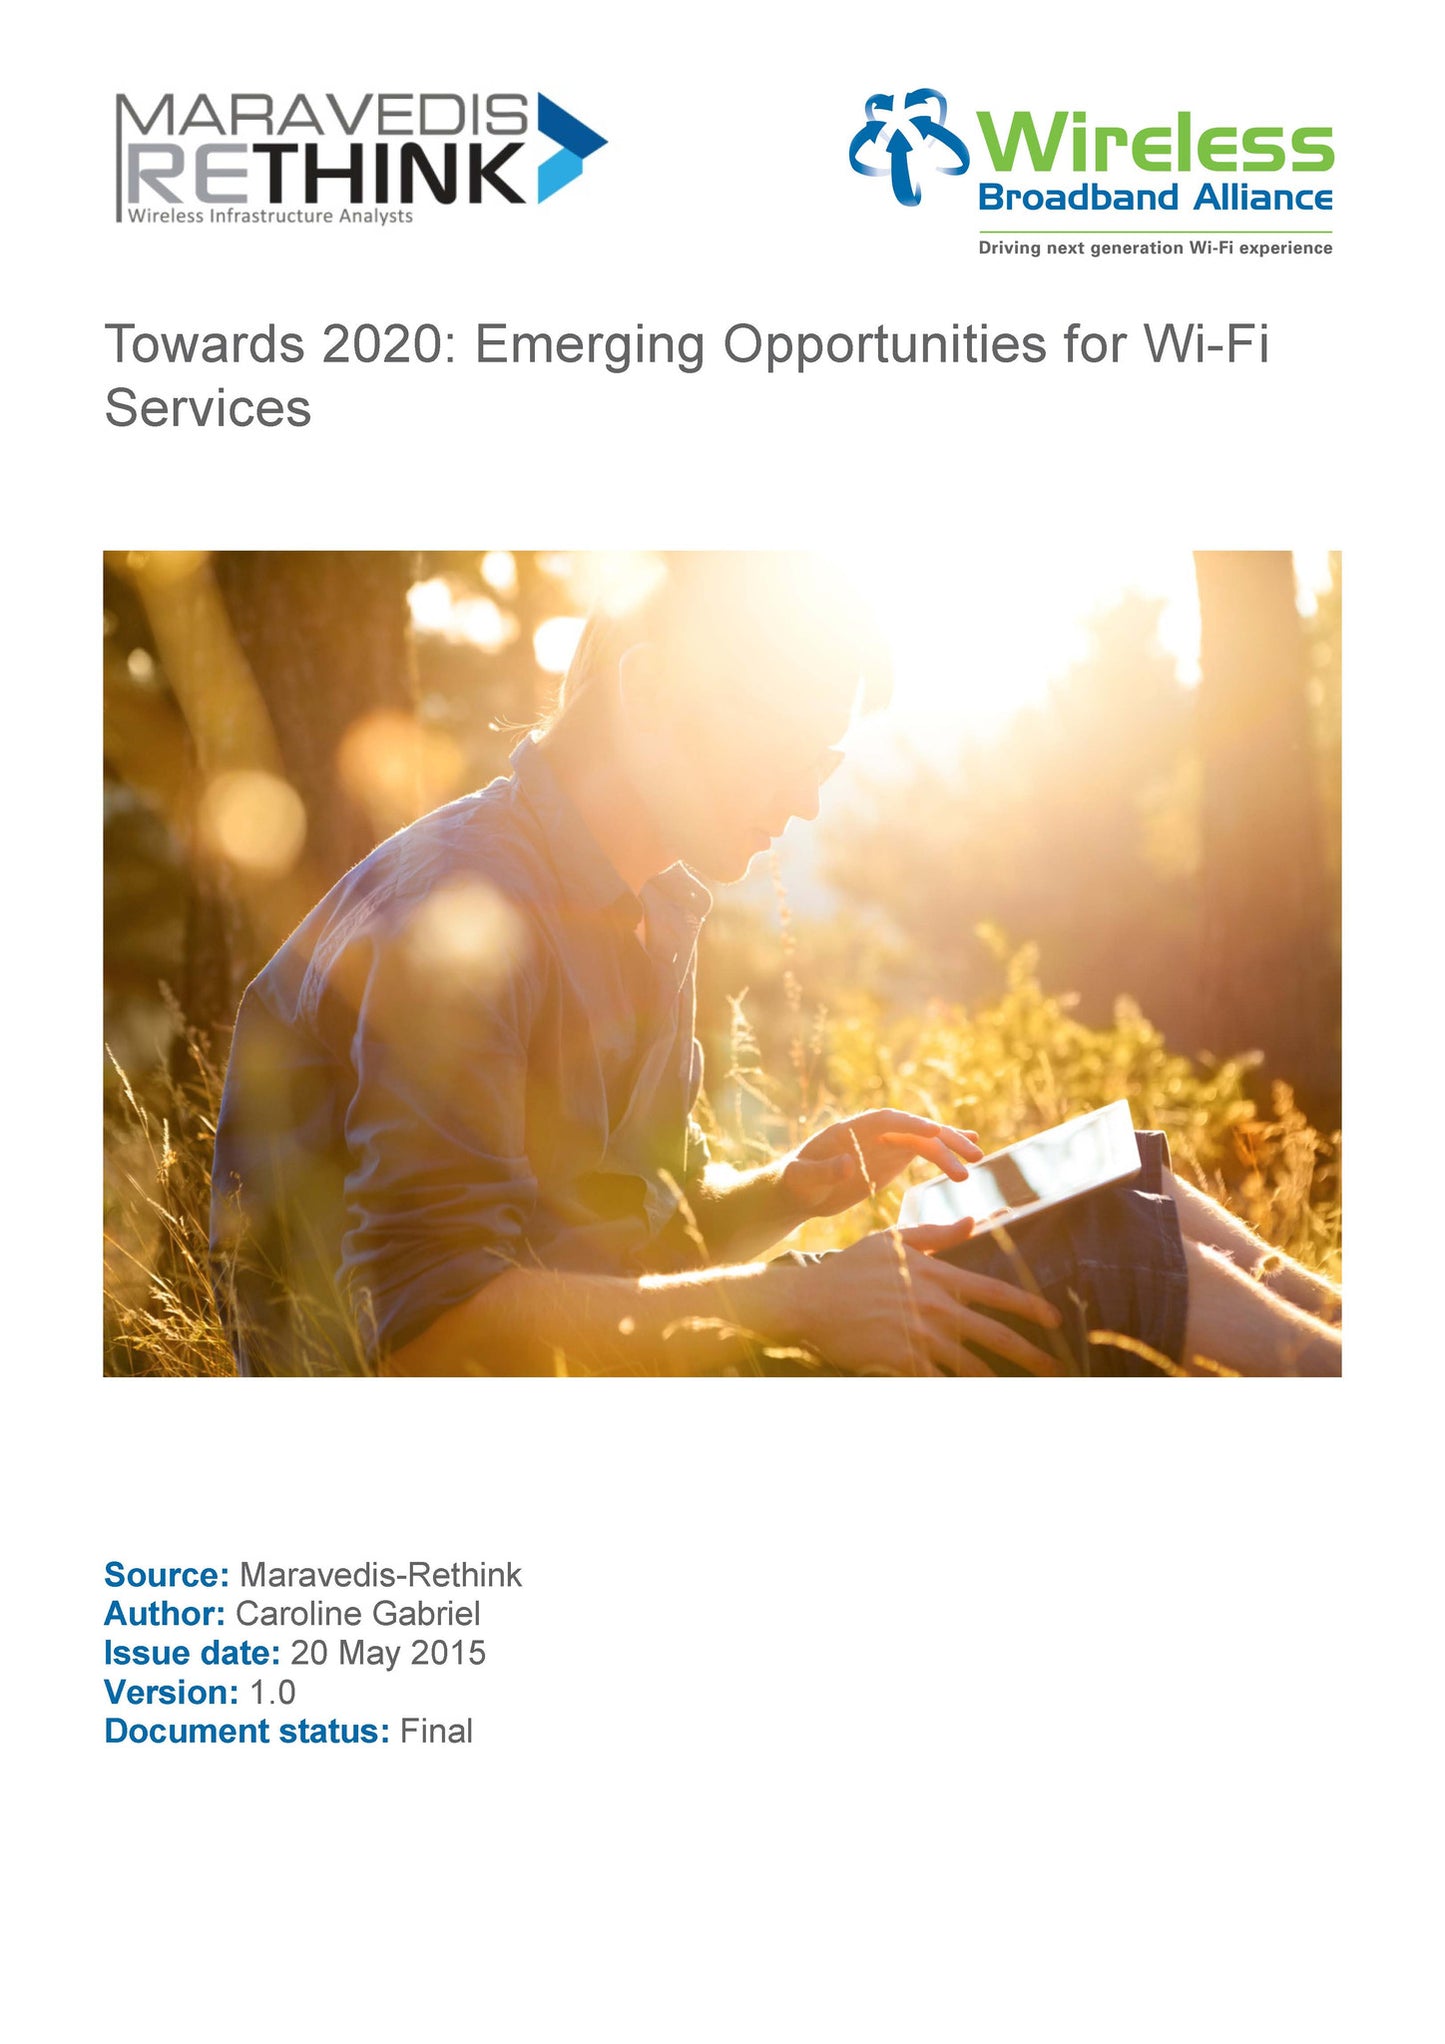 Towards 2020: Emerging Opportunities for Wi-Fi Services (Free Report)